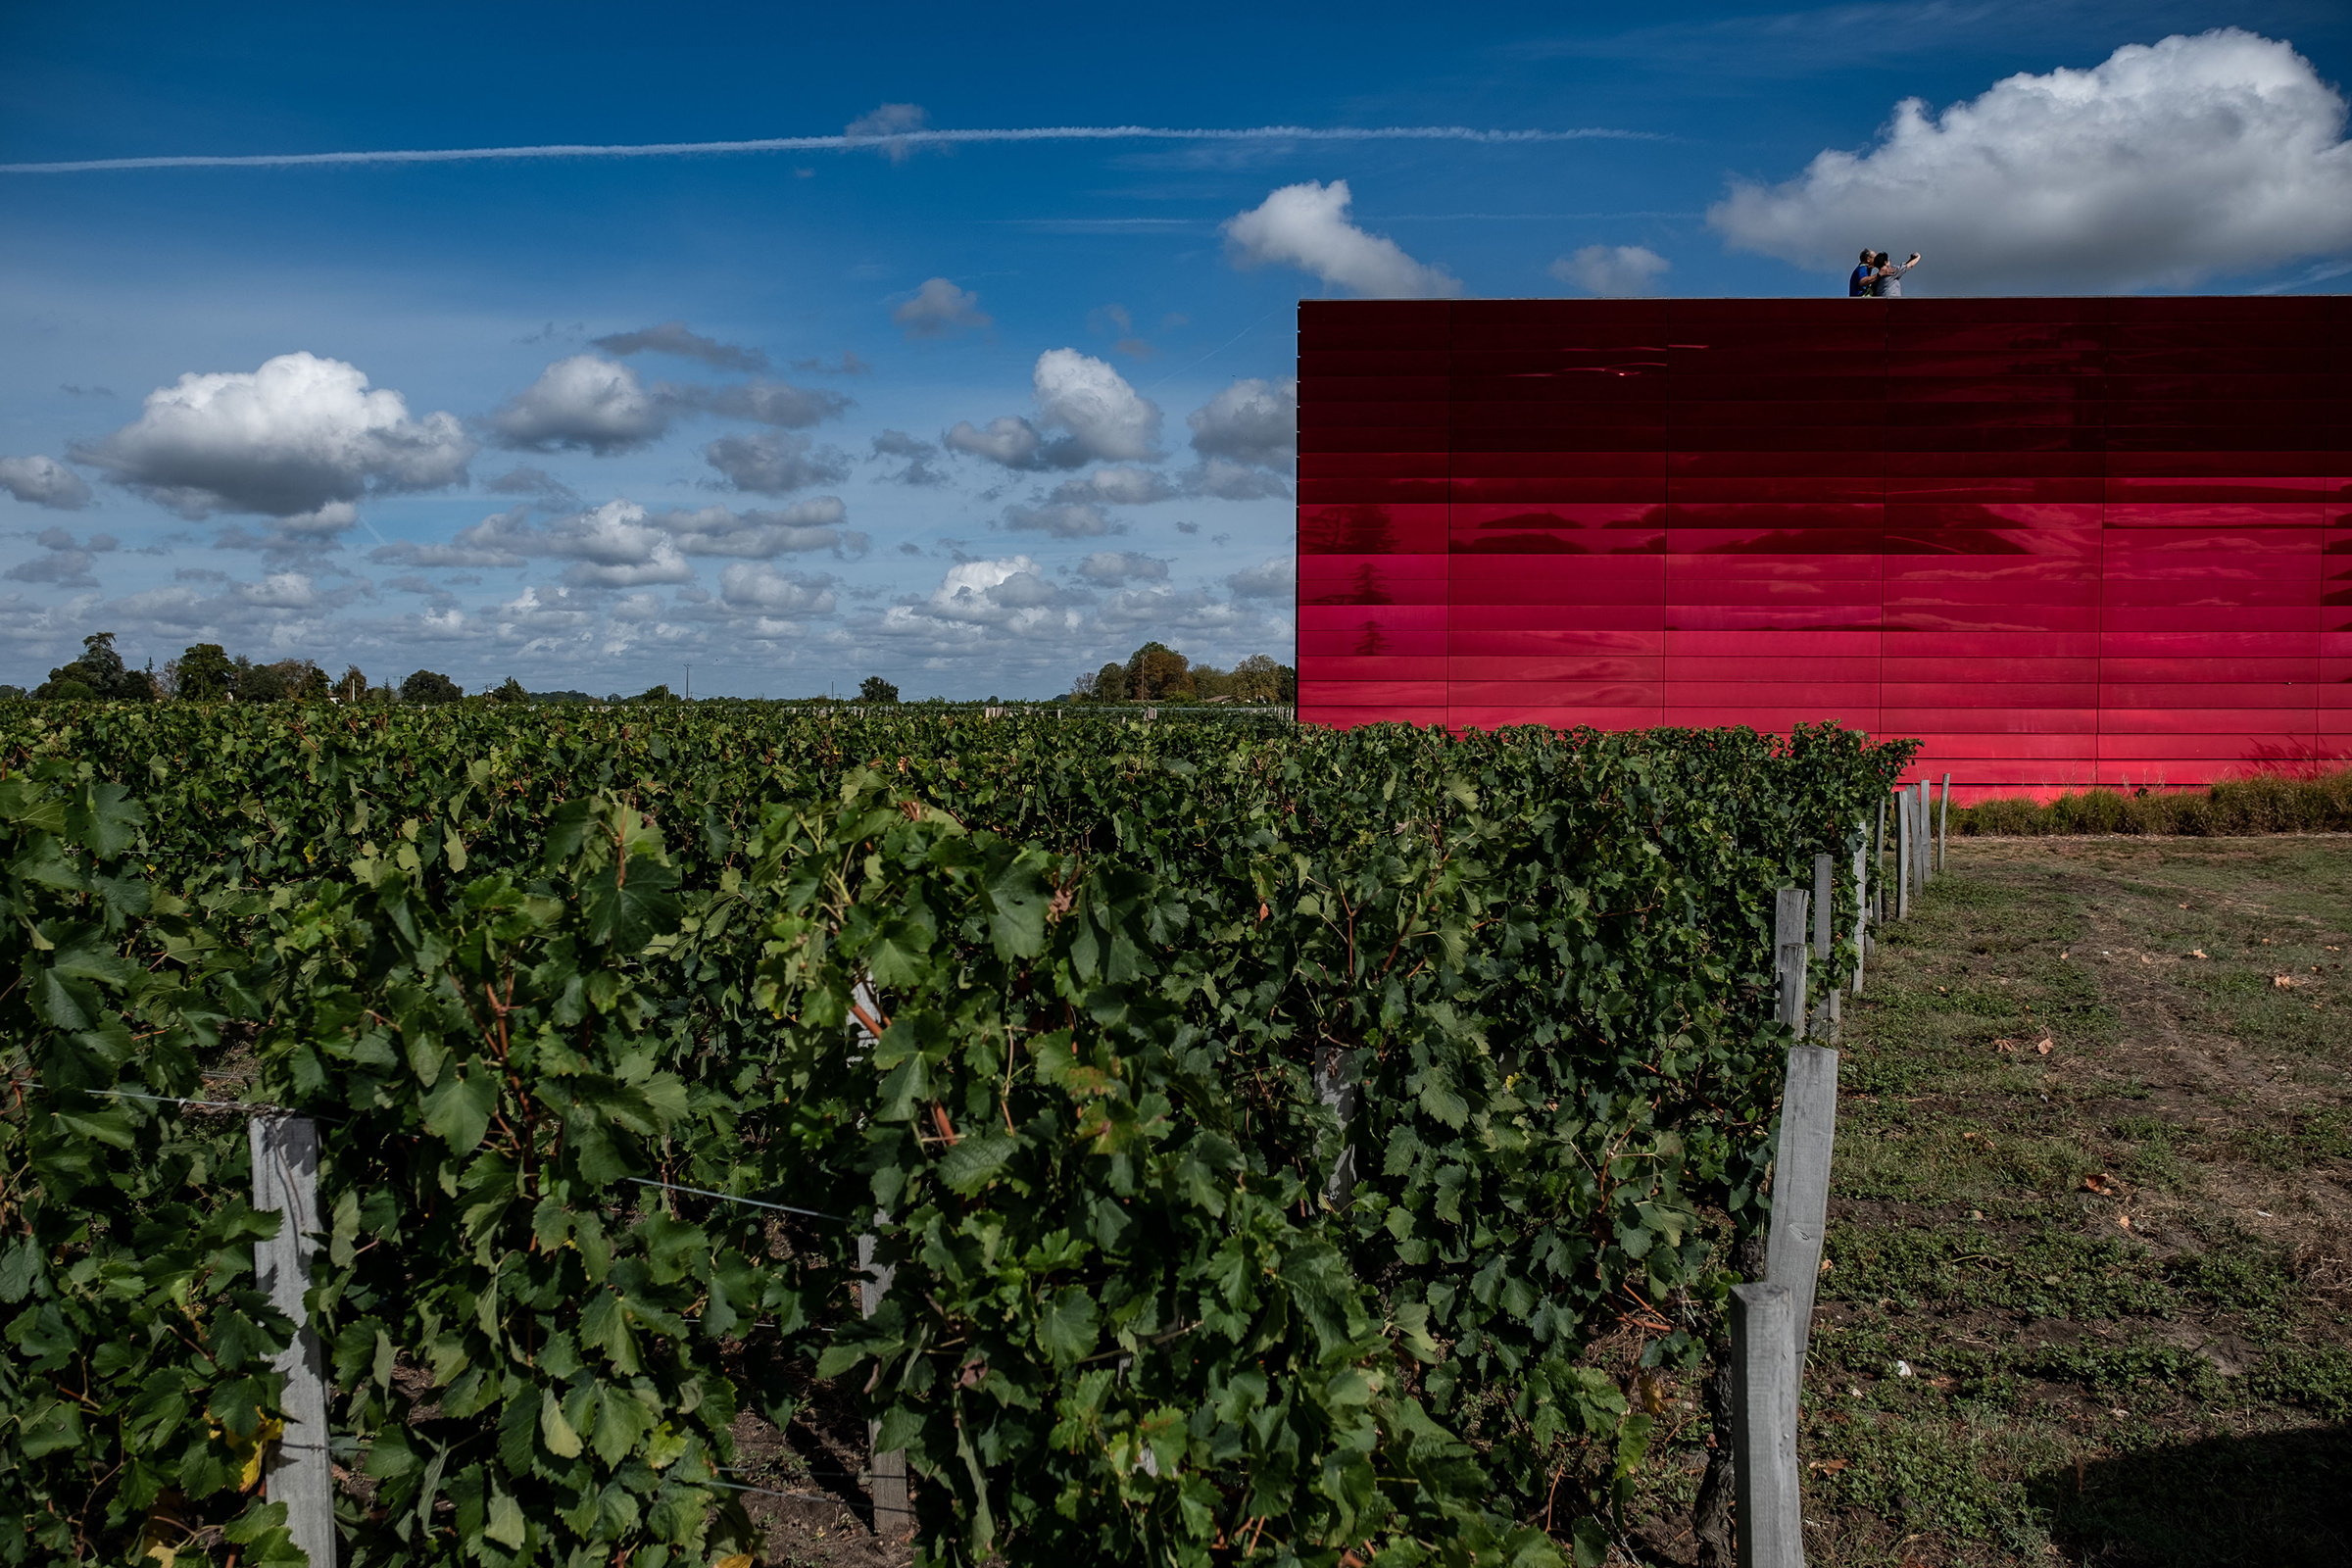 Visitors take a 'selfie' photograph on the roof garden of the Terasse Rouge winery and restaurant beside the vineyards at Chateau La Dominique in Pomerol, France, on Sept. 23, 2019 (Balint Porneczi—Bloomberg/Getty Images)